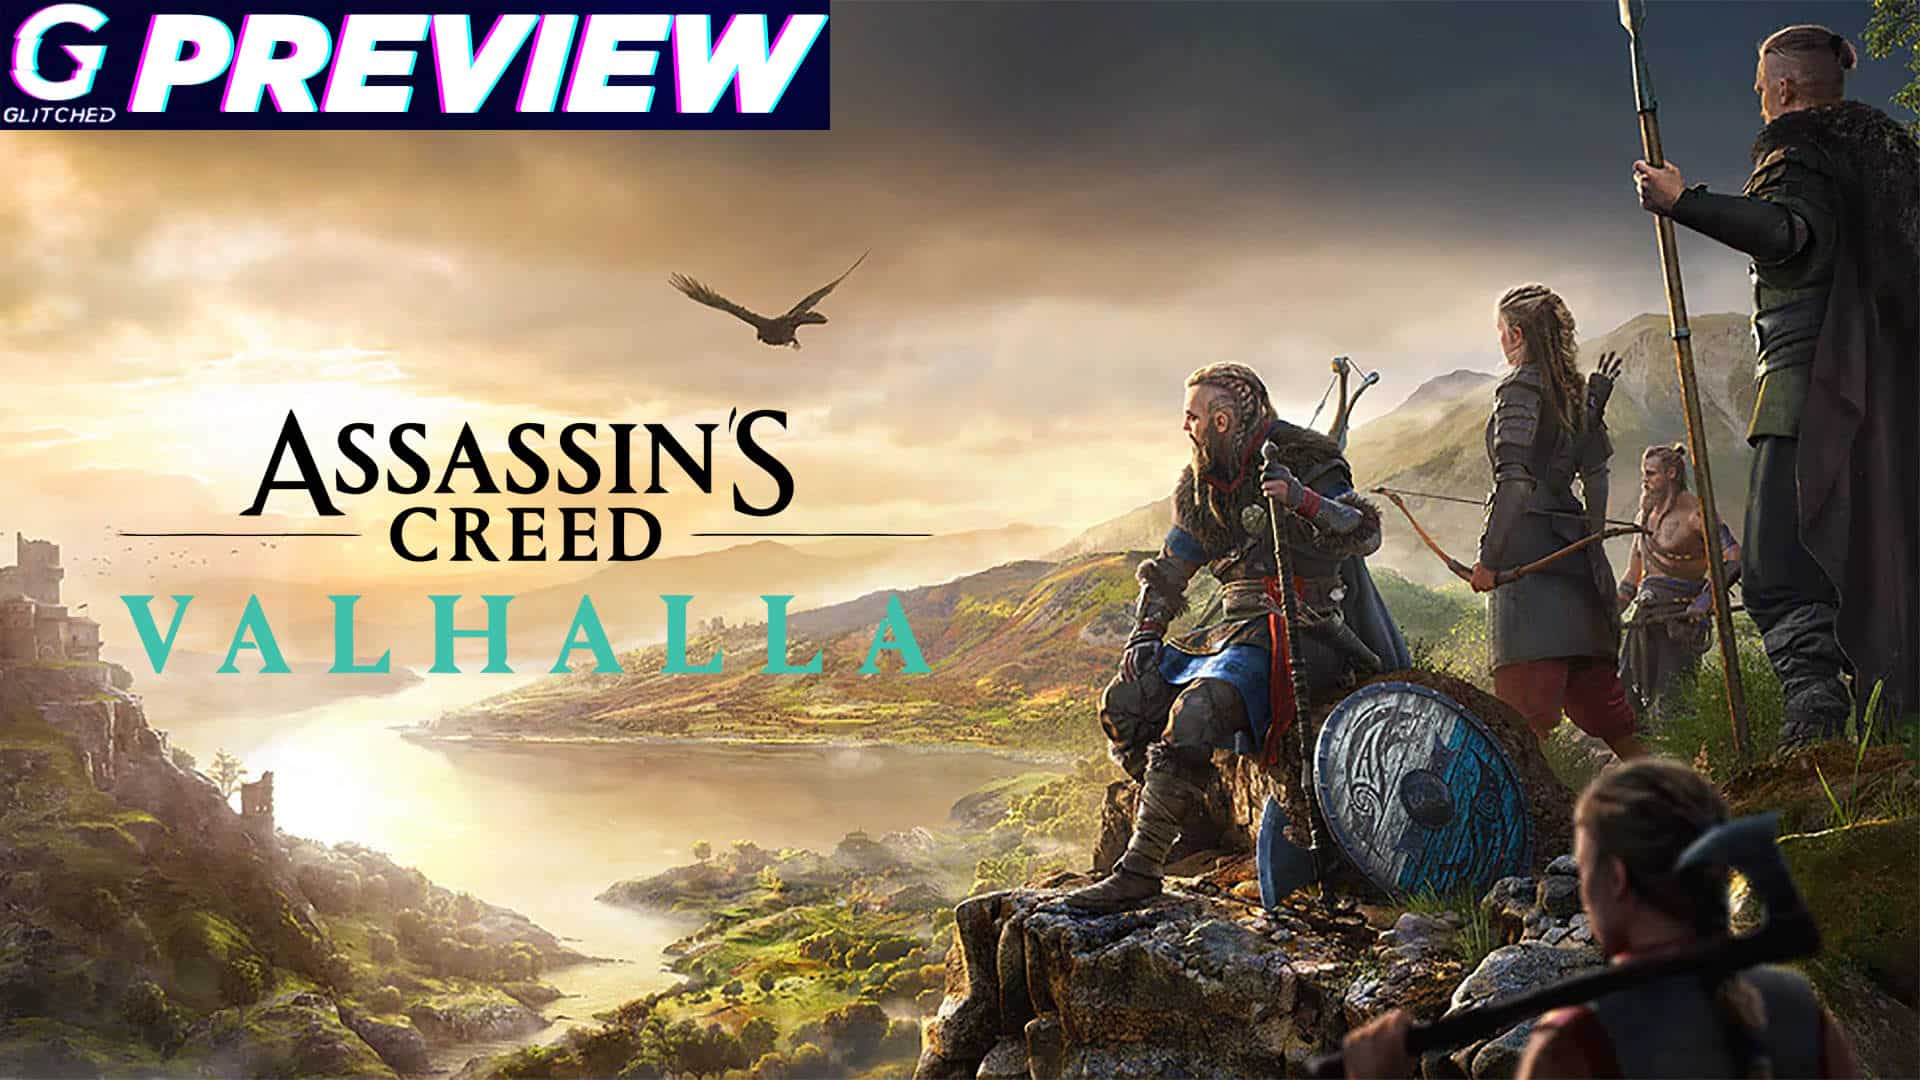 Assassin’s Creed Valhalla Doesn’t Reinvent The Wheel and That’s Okay – Hands-On